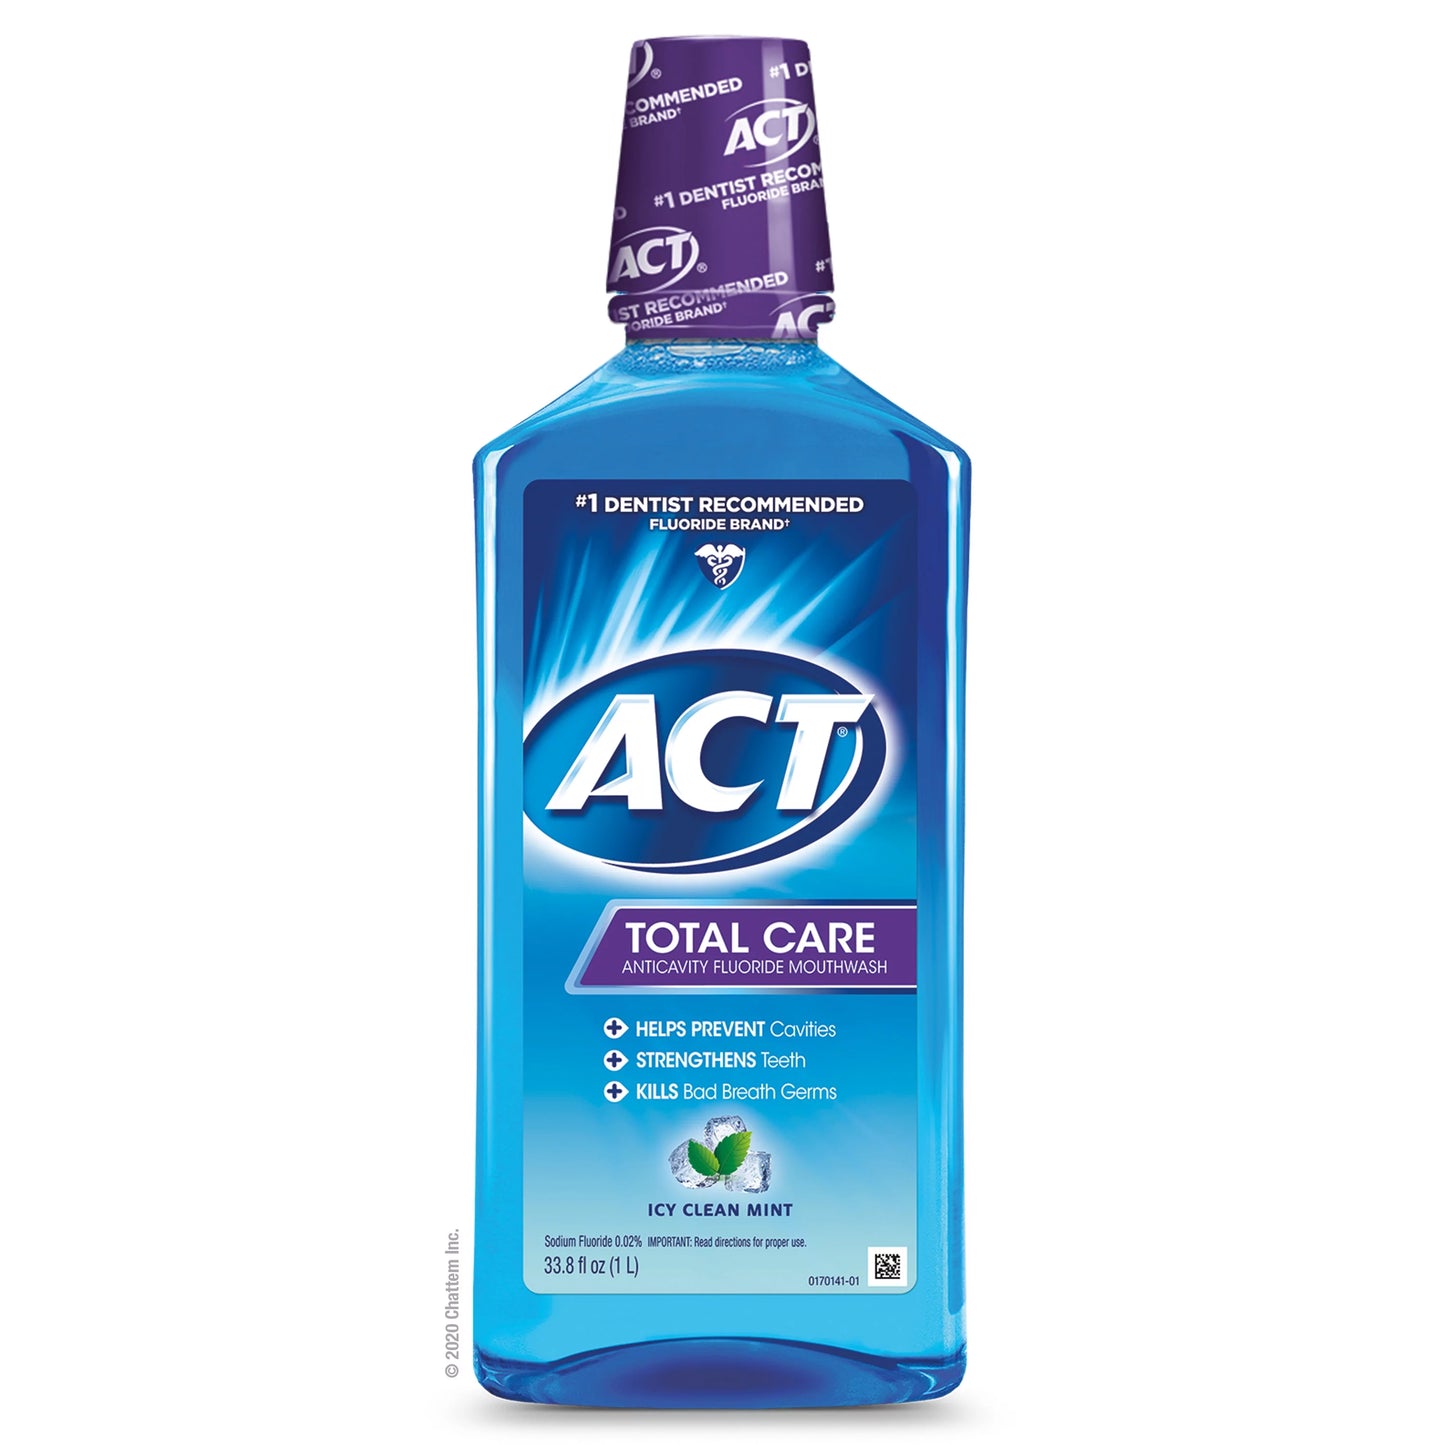 "Act Total Care Anticavity Fluoride Mouthwash, Icy Clean Mint, 18 oz, 3 Pack"